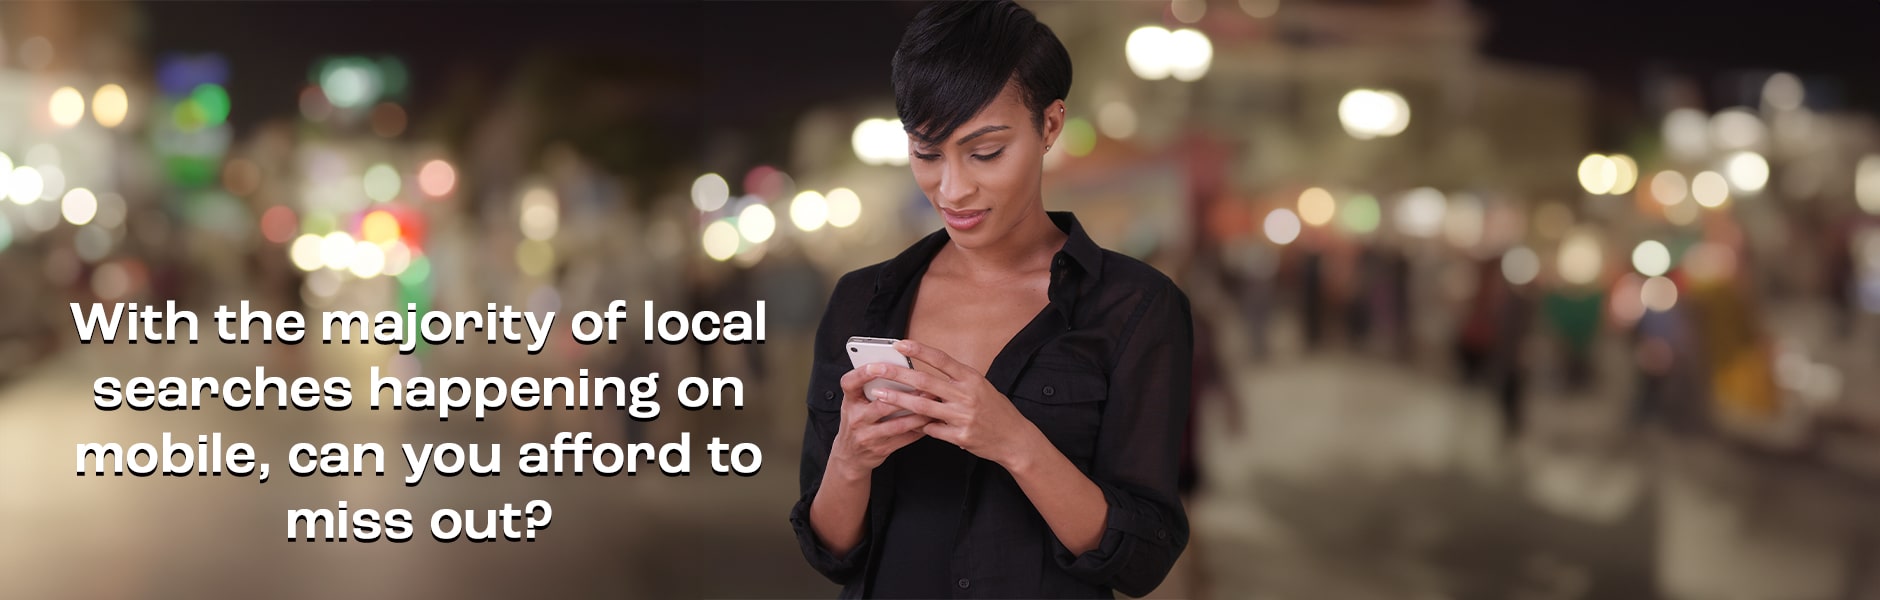 image of woman using her mobile to search for local businesses